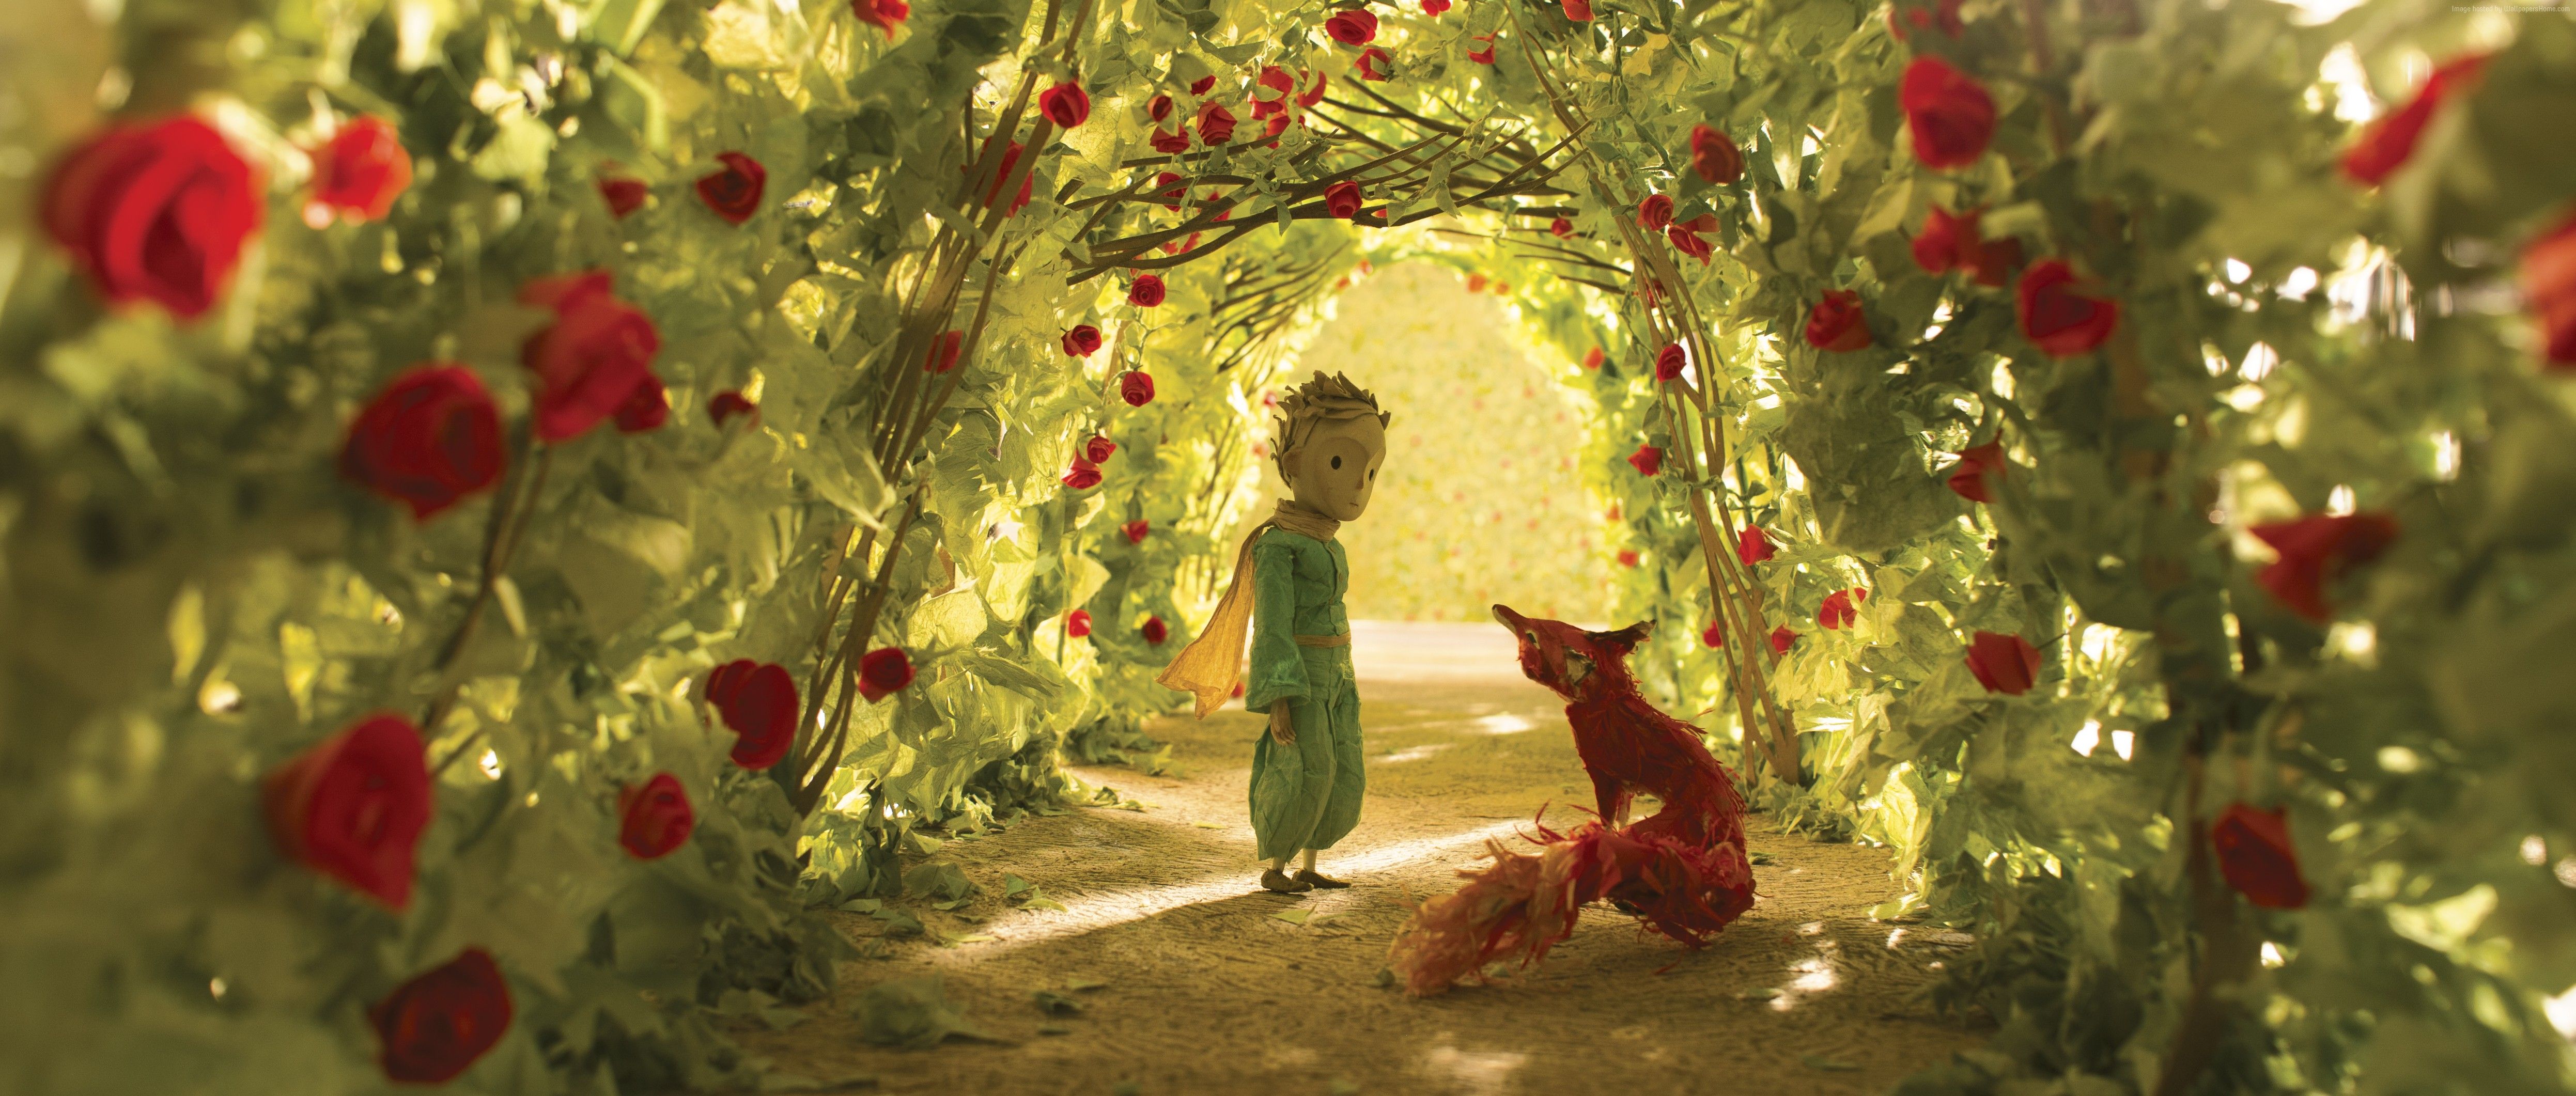 Wallpaper The Little Prince, The Fox, Movies